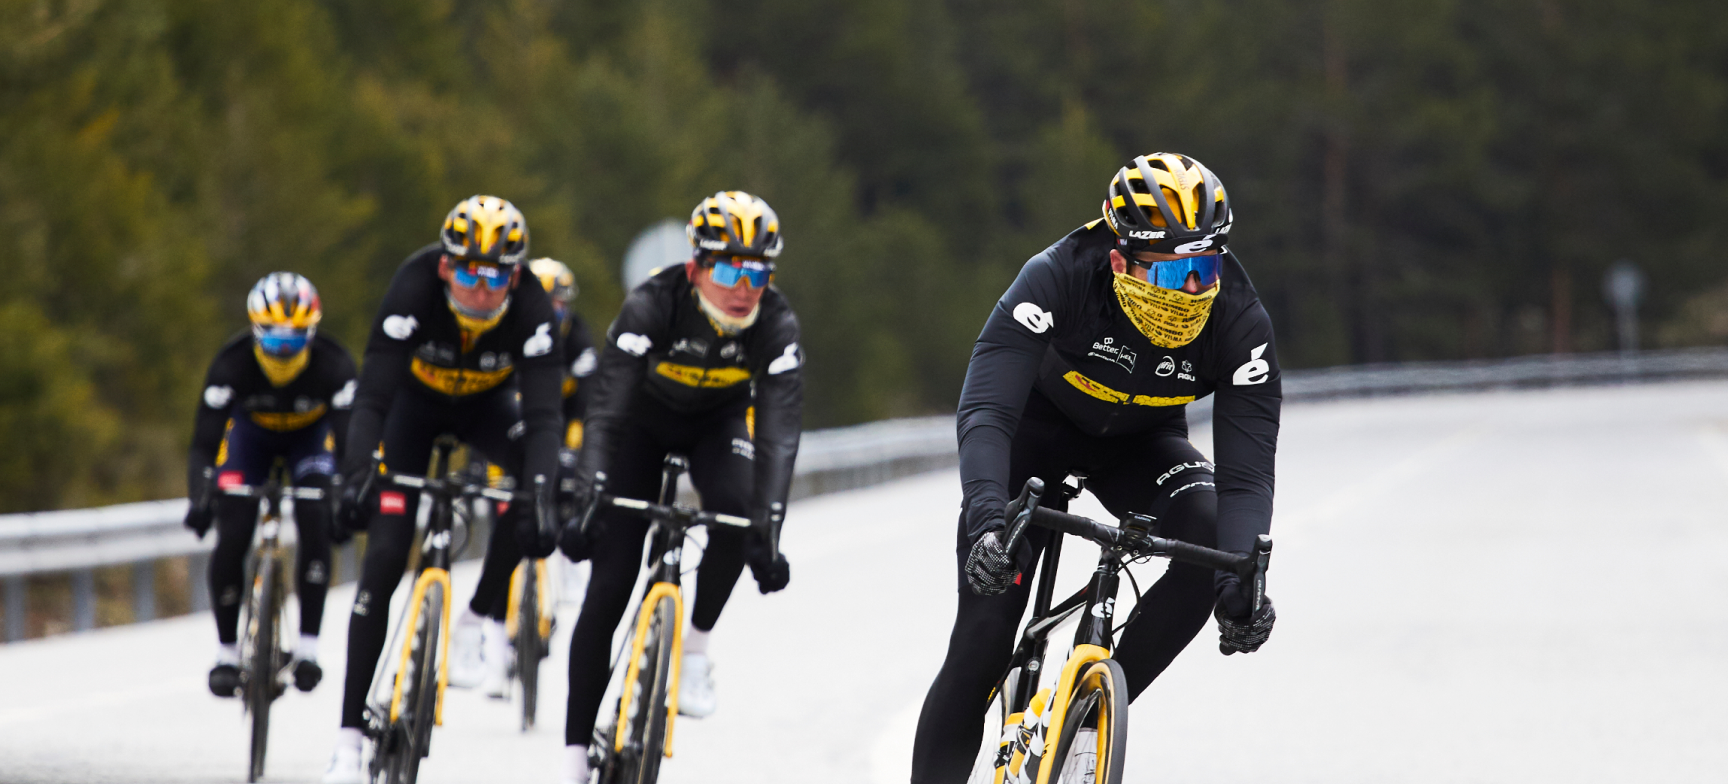 Five Team Jumbo-Visma riders riding in winter conditions